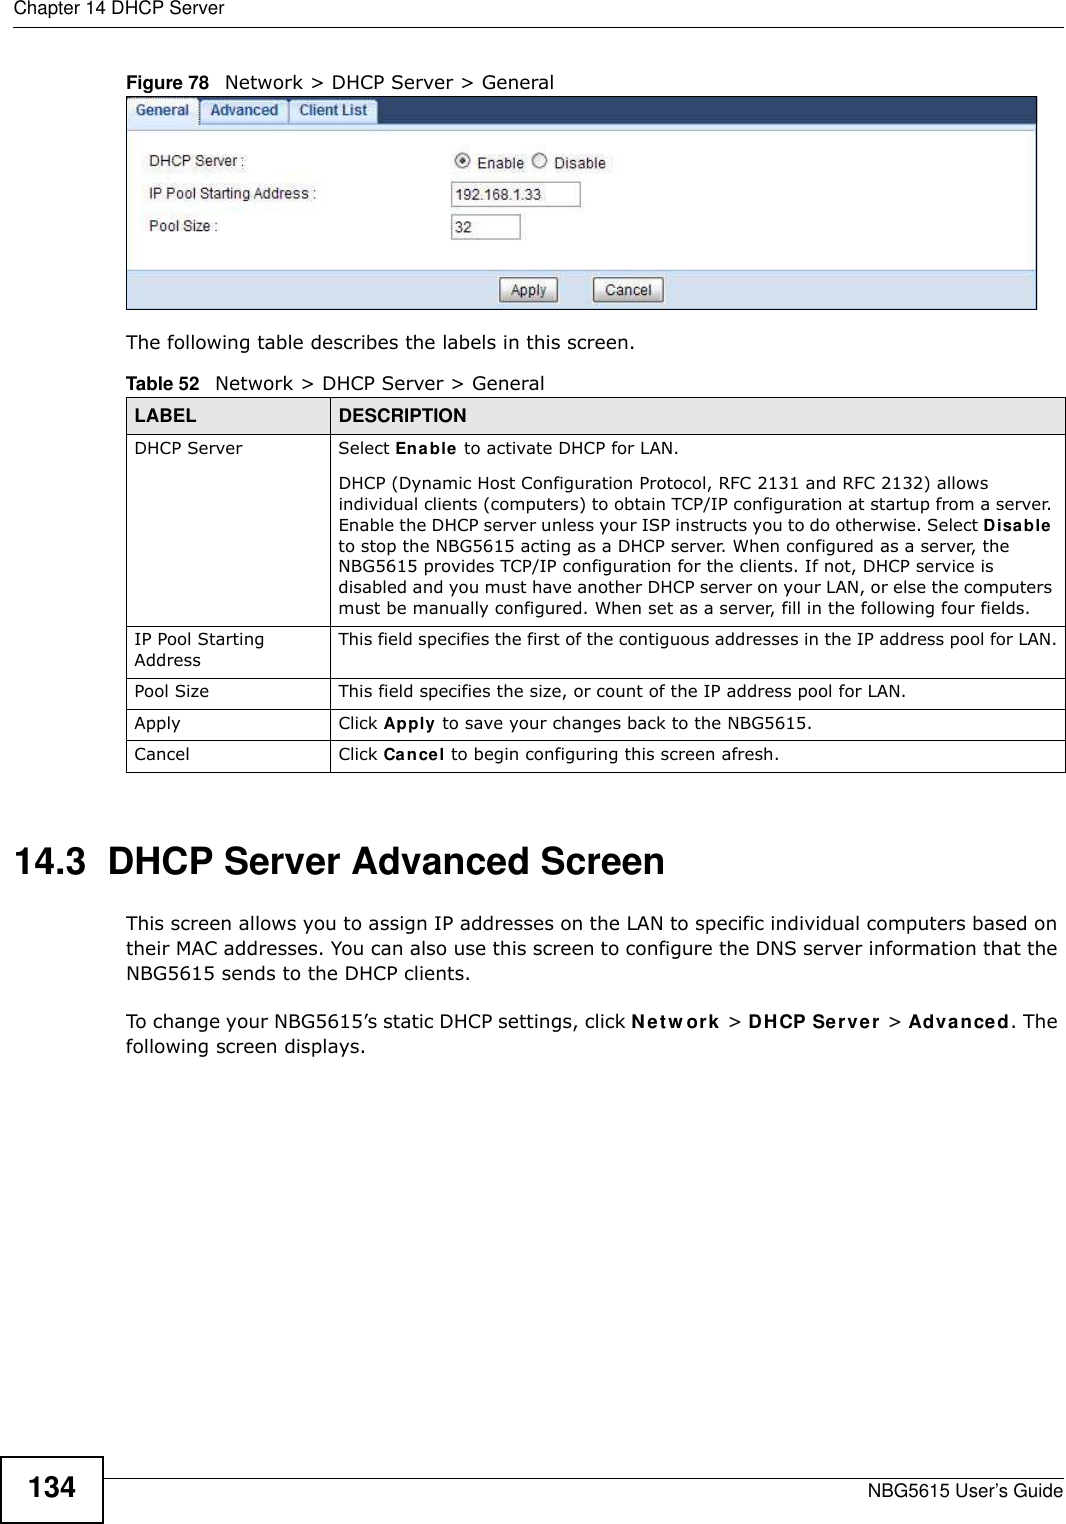 Chapter 14 DHCP ServerNBG5615 User’s Guide134Figure 78   Network &gt; DHCP Server &gt; General   The following table describes the labels in this screen.14.3  DHCP Server Advanced Screen    This screen allows you to assign IP addresses on the LAN to specific individual computers based on their MAC addresses. You can also use this screen to configure the DNS server information that the NBG5615 sends to the DHCP clients.To change your NBG5615’s static DHCP settings, click Netw ork &gt; DHCP Server &gt; Advanced. The following screen displays.Table 52   Network &gt; DHCP Server &gt; General  LABEL DESCRIPTIONDHCP Server Select Enable to activate DHCP for LAN.DHCP (Dynamic Host Configuration Protocol, RFC 2131 and RFC 2132) allows individual clients (computers) to obtain TCP/IP configuration at startup from a server. Enable the DHCP server unless your ISP instructs you to do otherwise. Select Disable to stop the NBG5615 acting as a DHCP server. When configured as a server, the NBG5615 provides TCP/IP configuration for the clients. If not, DHCP service is disabled and you must have another DHCP server on your LAN, or else the computers must be manually configured. When set as a server, fill in the following four fields.IP Pool Starting AddressThis field specifies the first of the contiguous addresses in the IP address pool for LAN.Pool Size This field specifies the size, or count of the IP address pool for LAN.Apply Click Apply to save your changes back to the NBG5615.Cancel Click Cancel to begin configuring this screen afresh.